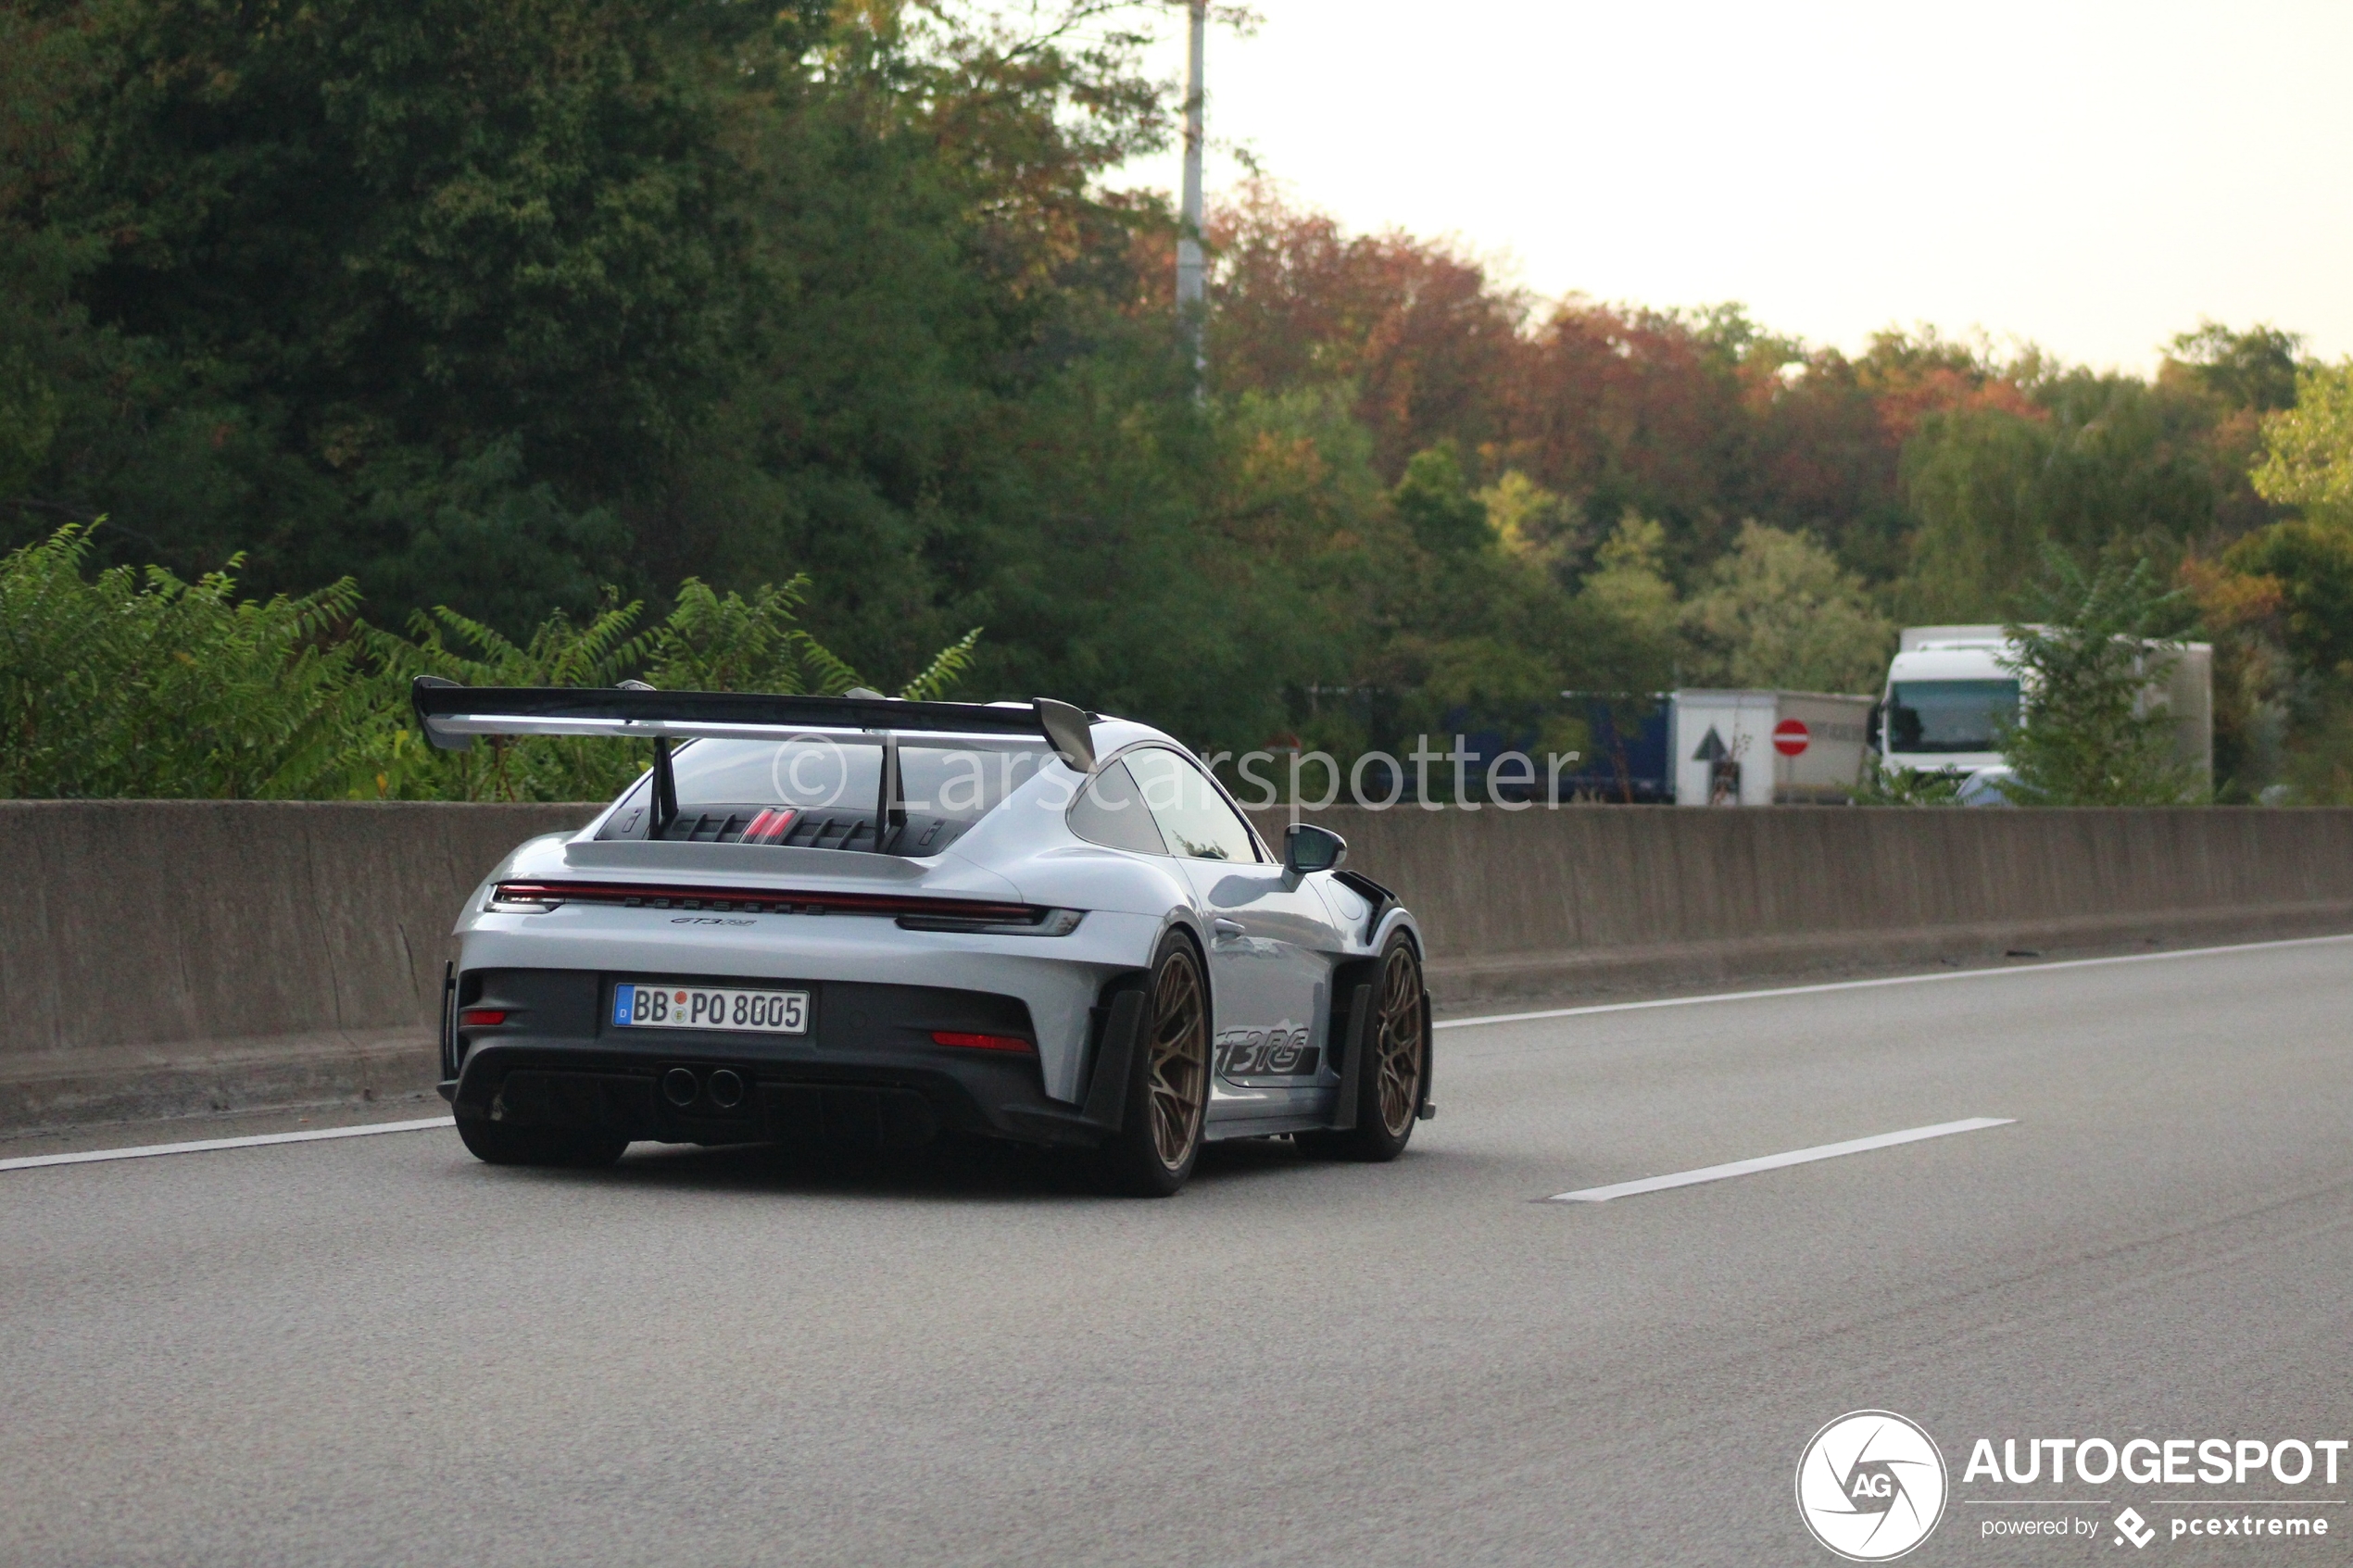 This is what the Porsche 992 GT3 RS looks like on the highway